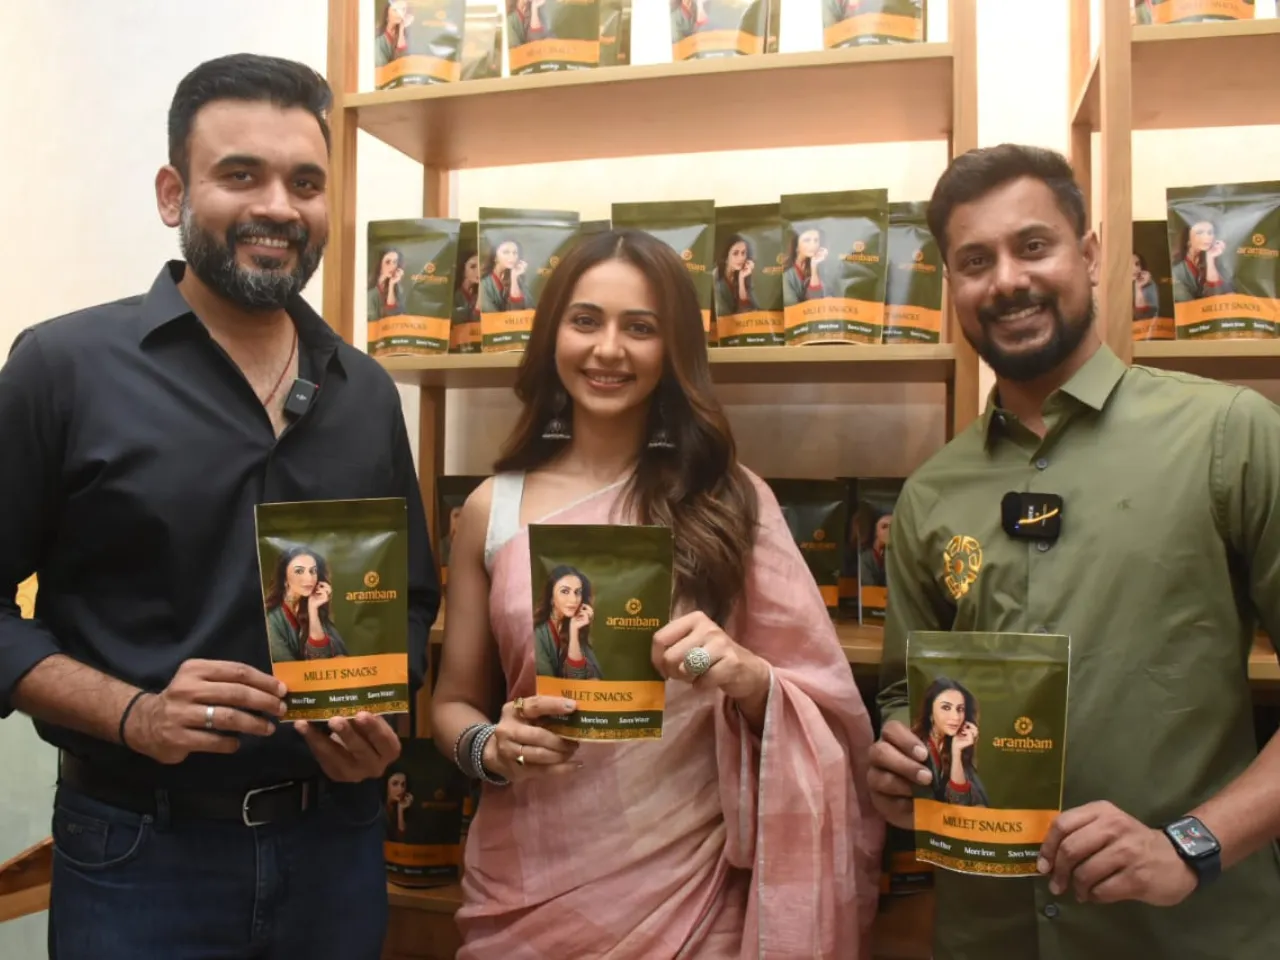 Rakul Preet Singh and Curefoods join hands to launch Arambam – a millet-centric dine-in restaurant in Hyderabad